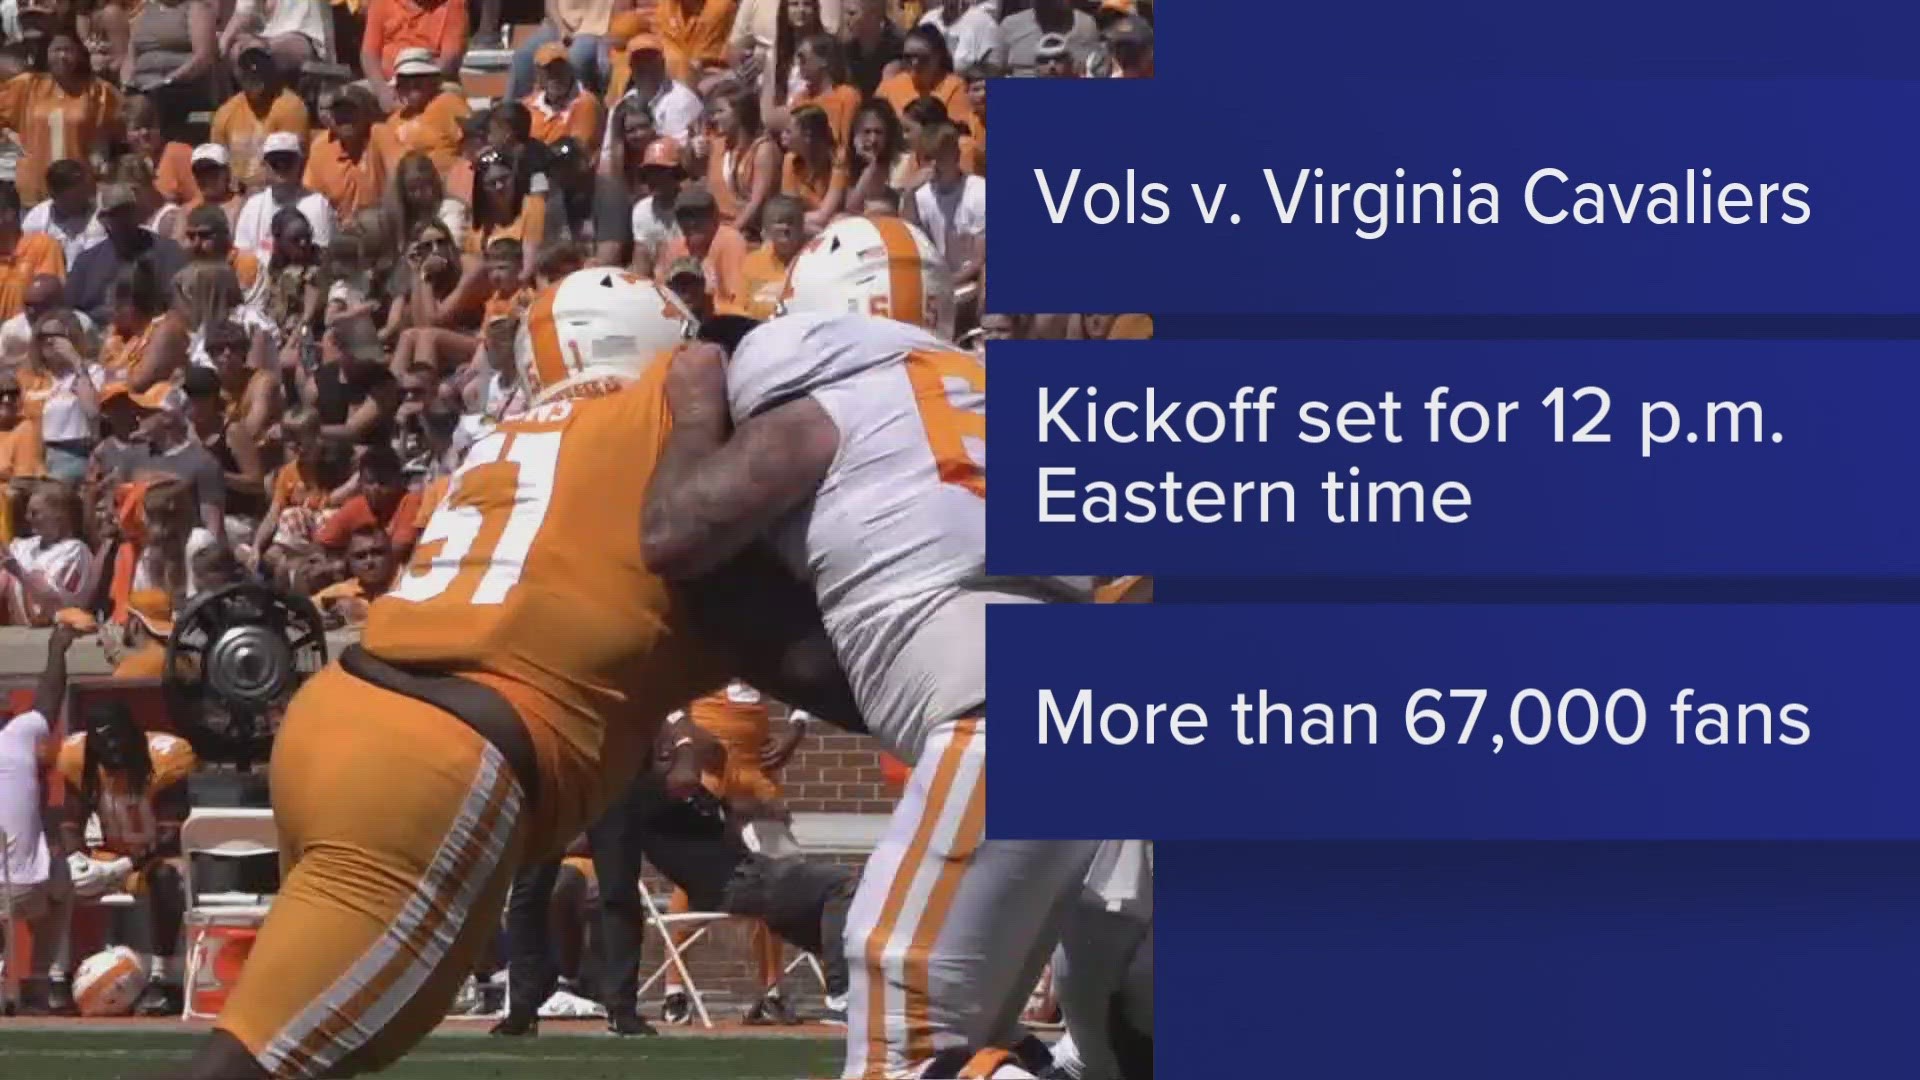 On Saturday, Tennessee will play against the Virginia Cavaliers in Nissan Stadium.